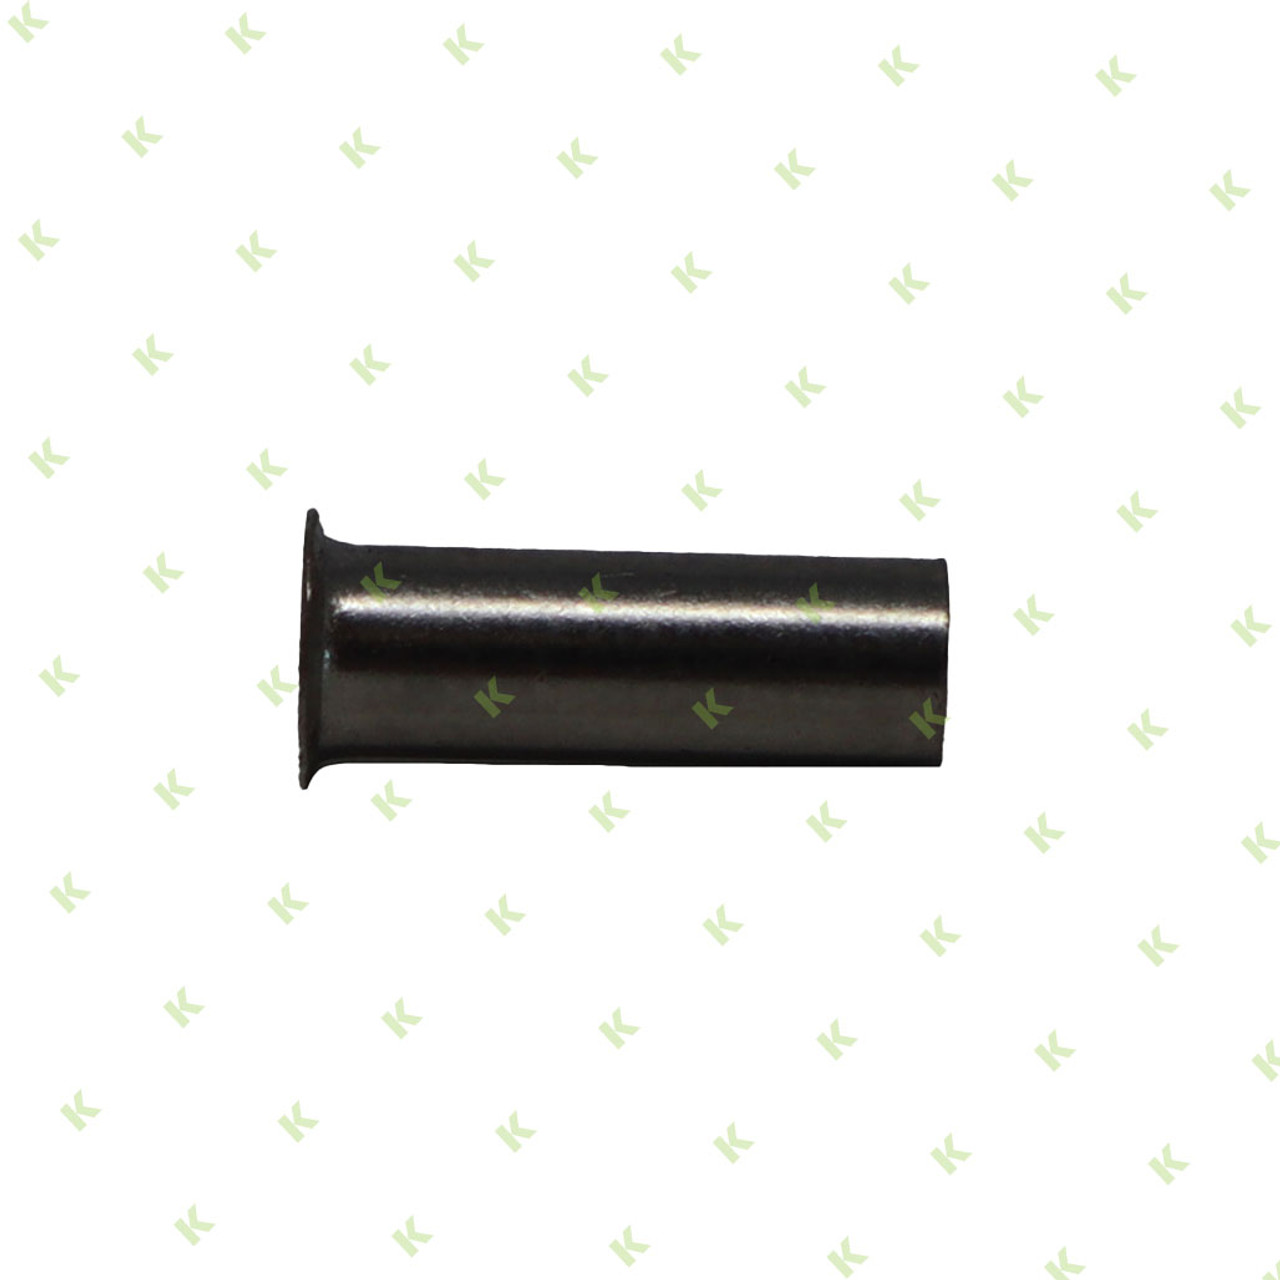 Support bushing 6/4 mm